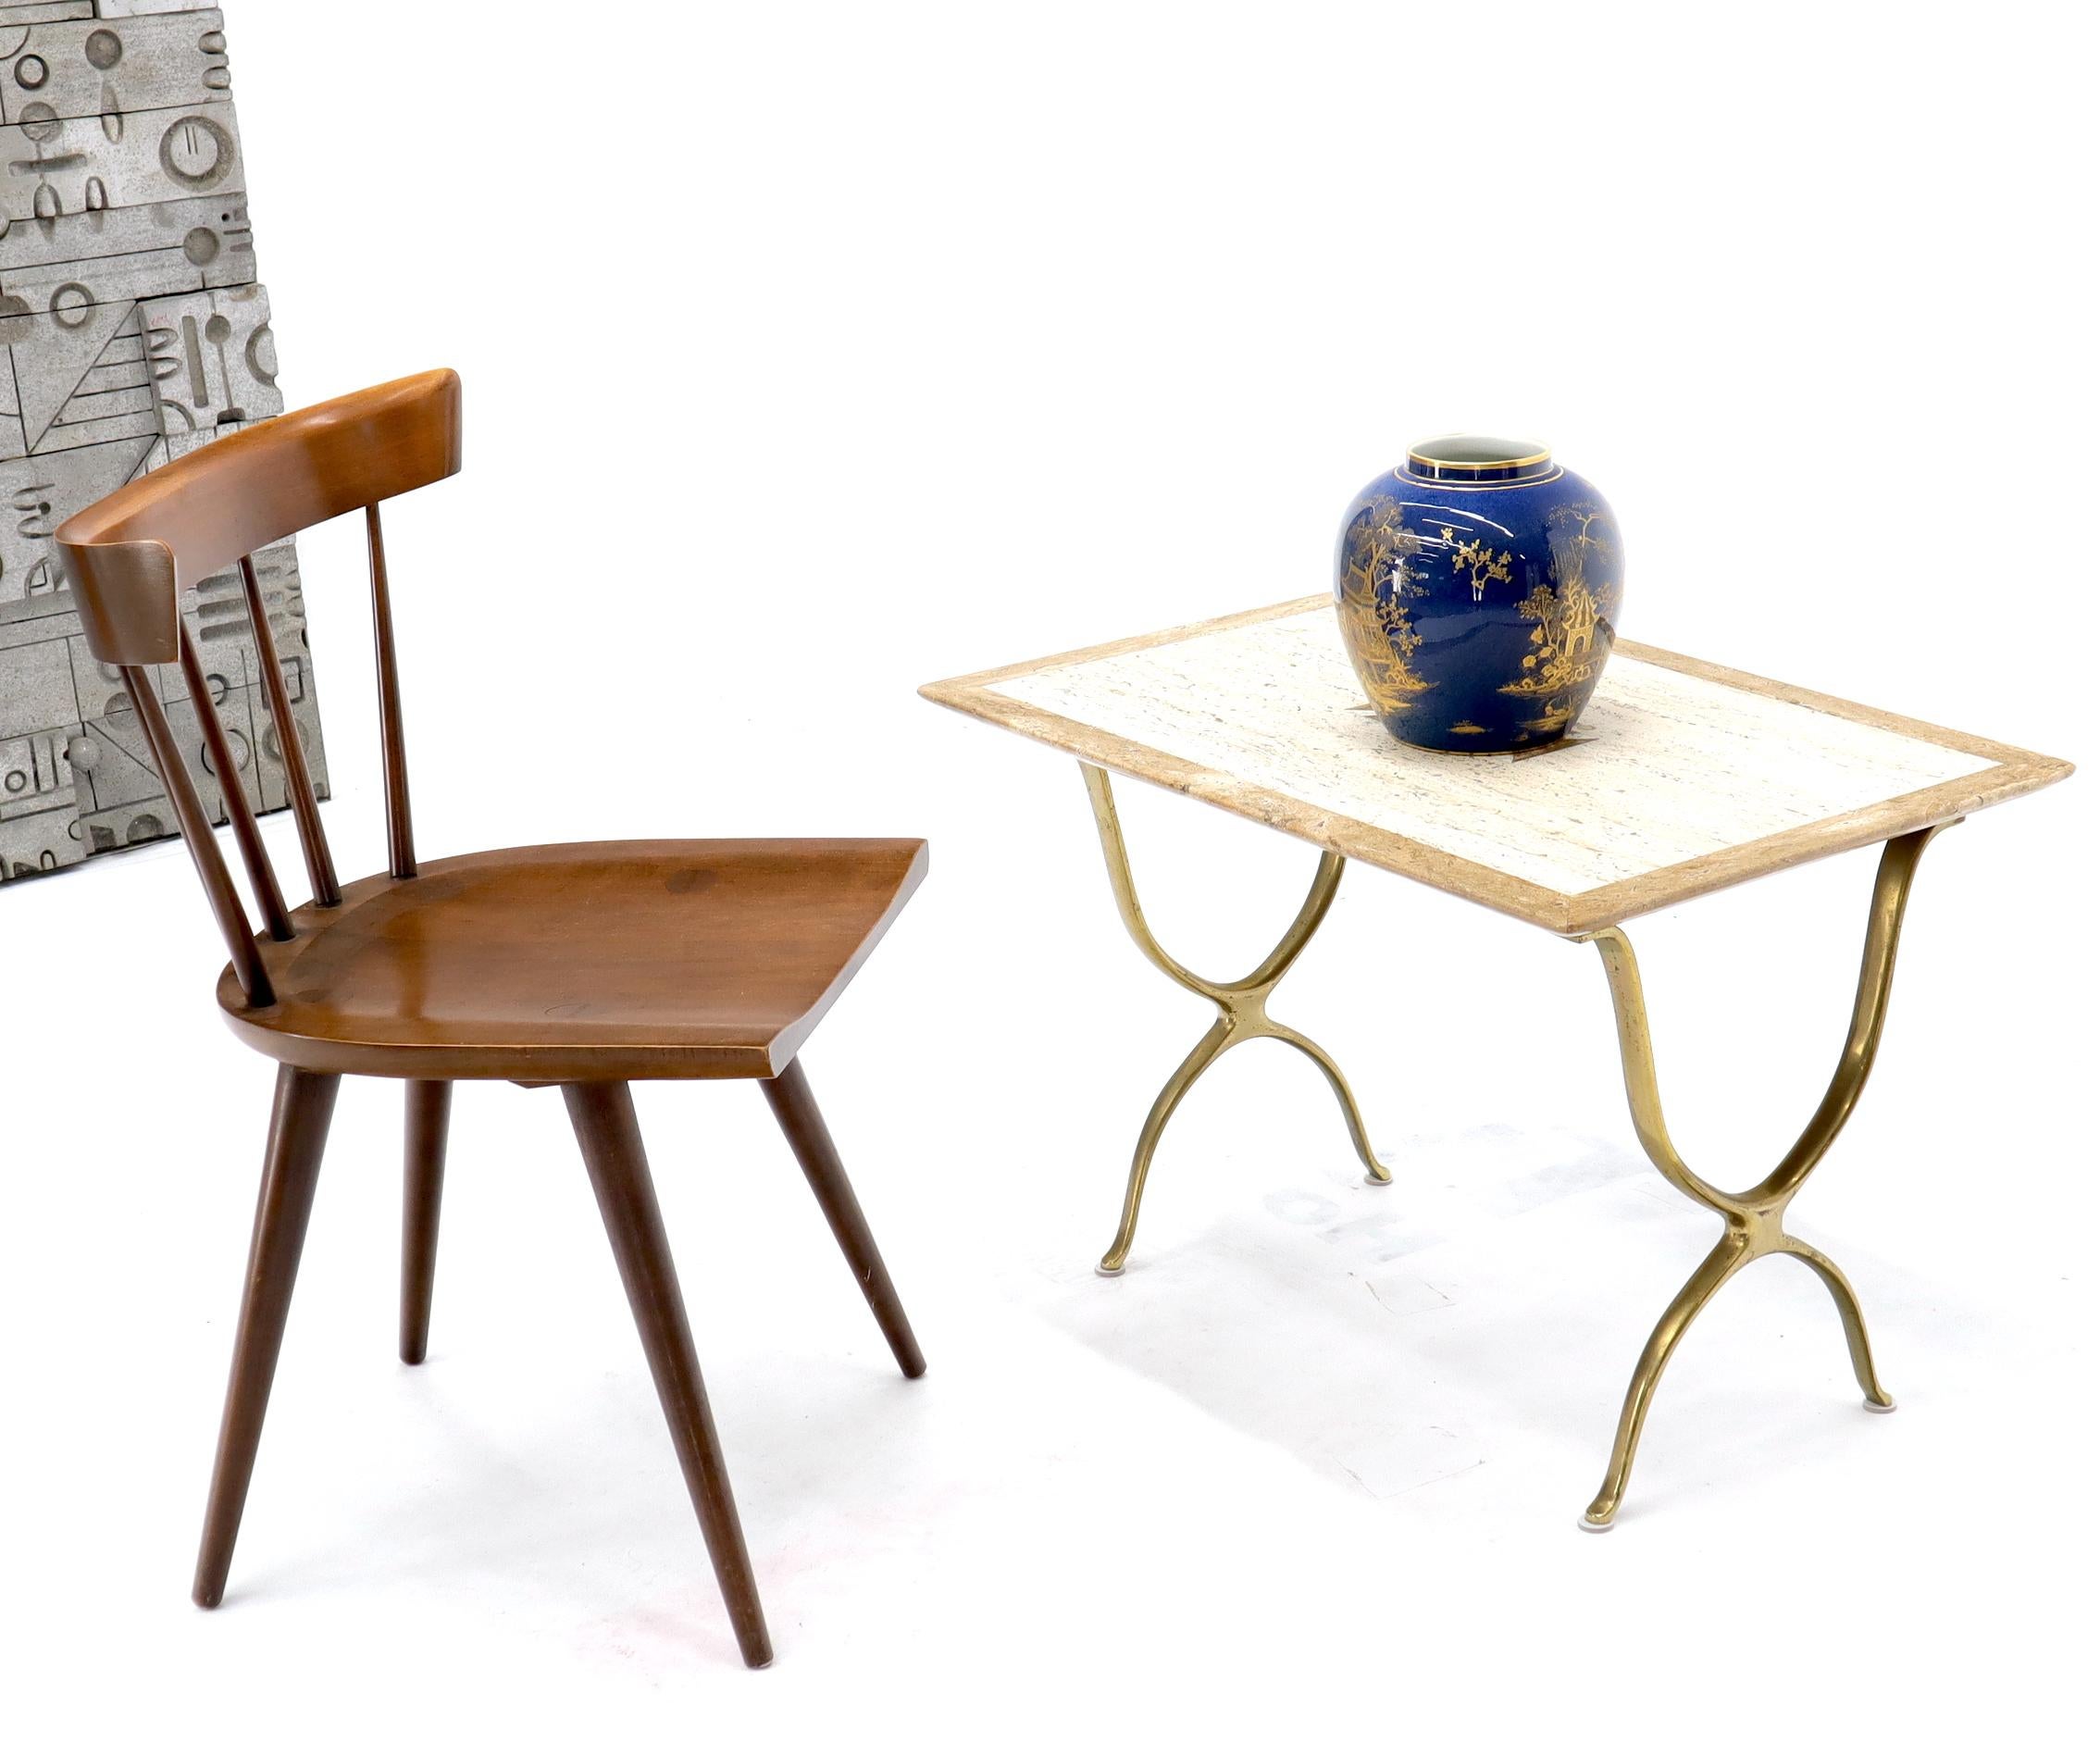 Midcentury Italian modern inlay decorated travertine top side end tables on bent X-bases. High quality decorative occasional tables in mint condition.